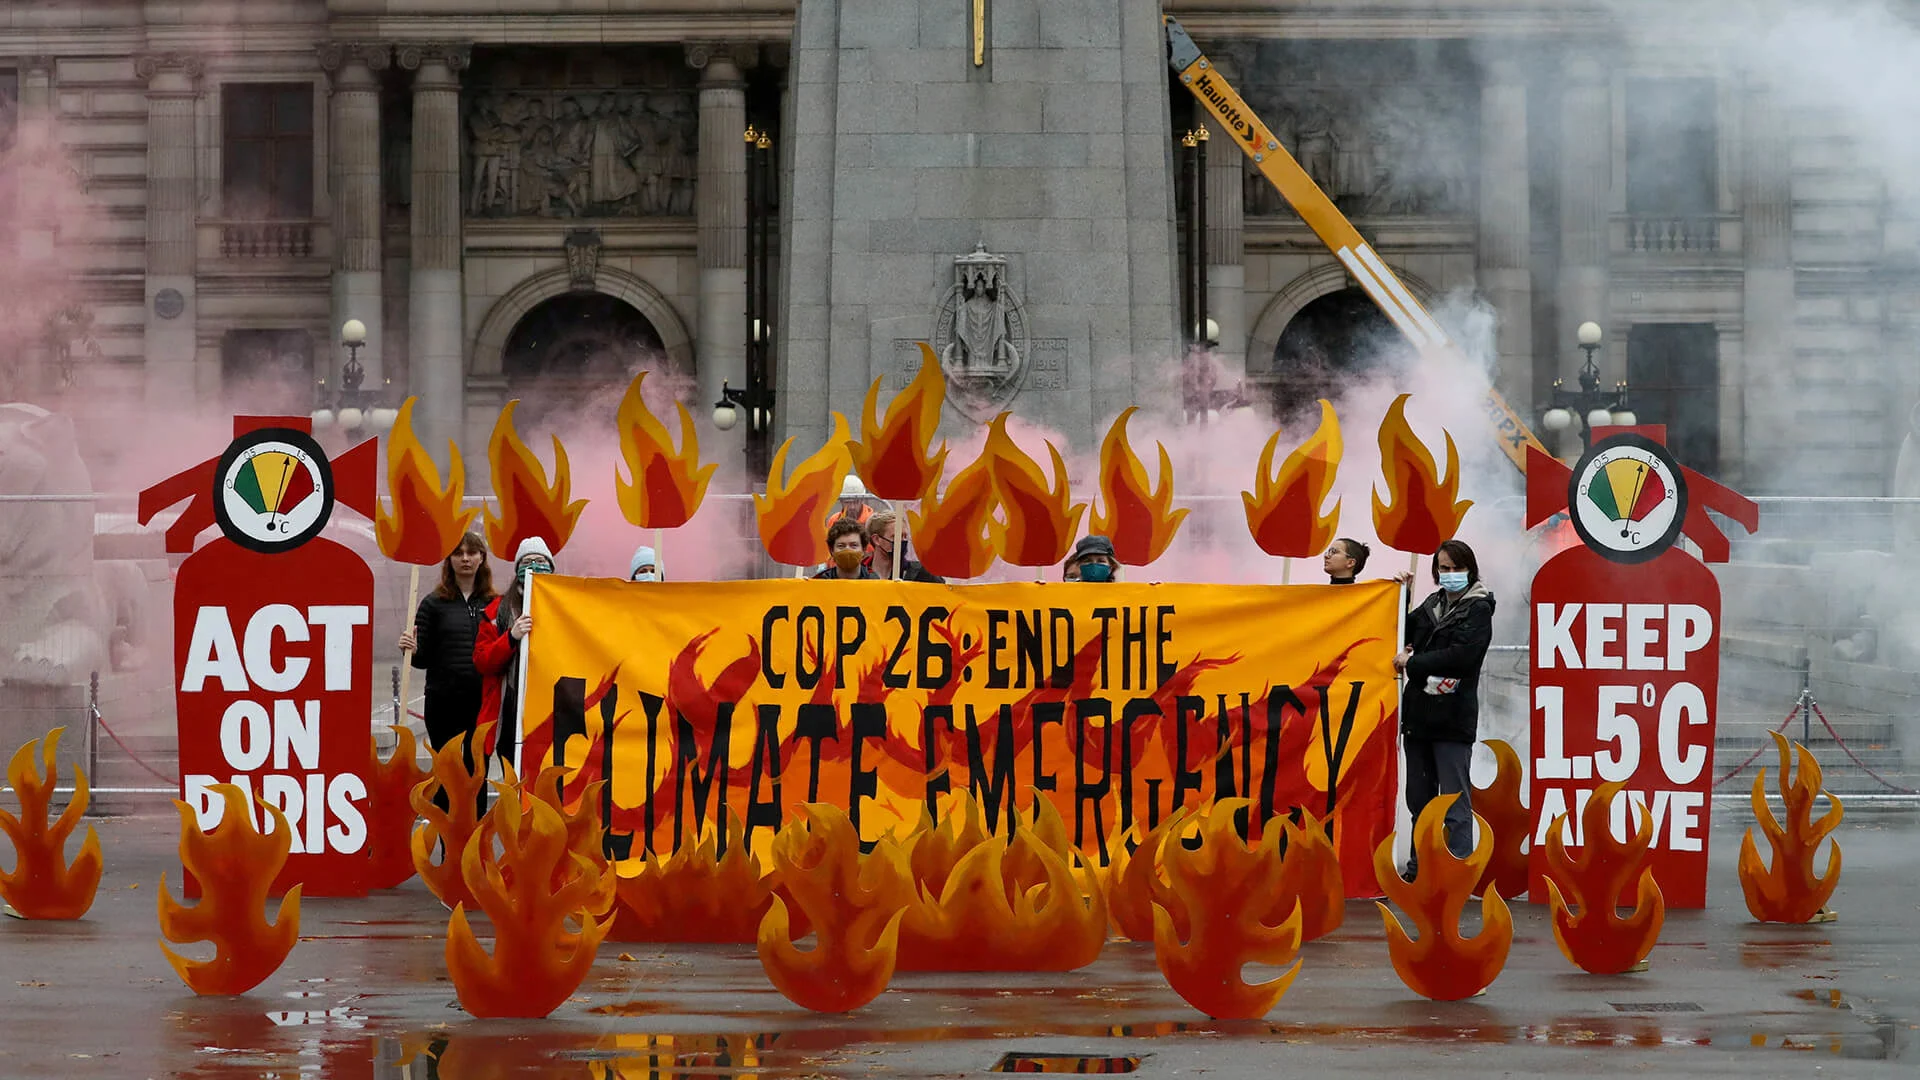 Activists symbolically set George Square on fire with an art installation of faux flames and smoke ahead of the UN Climate Change Conference (COP26), in Glasgow, Scotland, Britain October 28, 2021. REUTERS/Russell Cheyne/File Photo